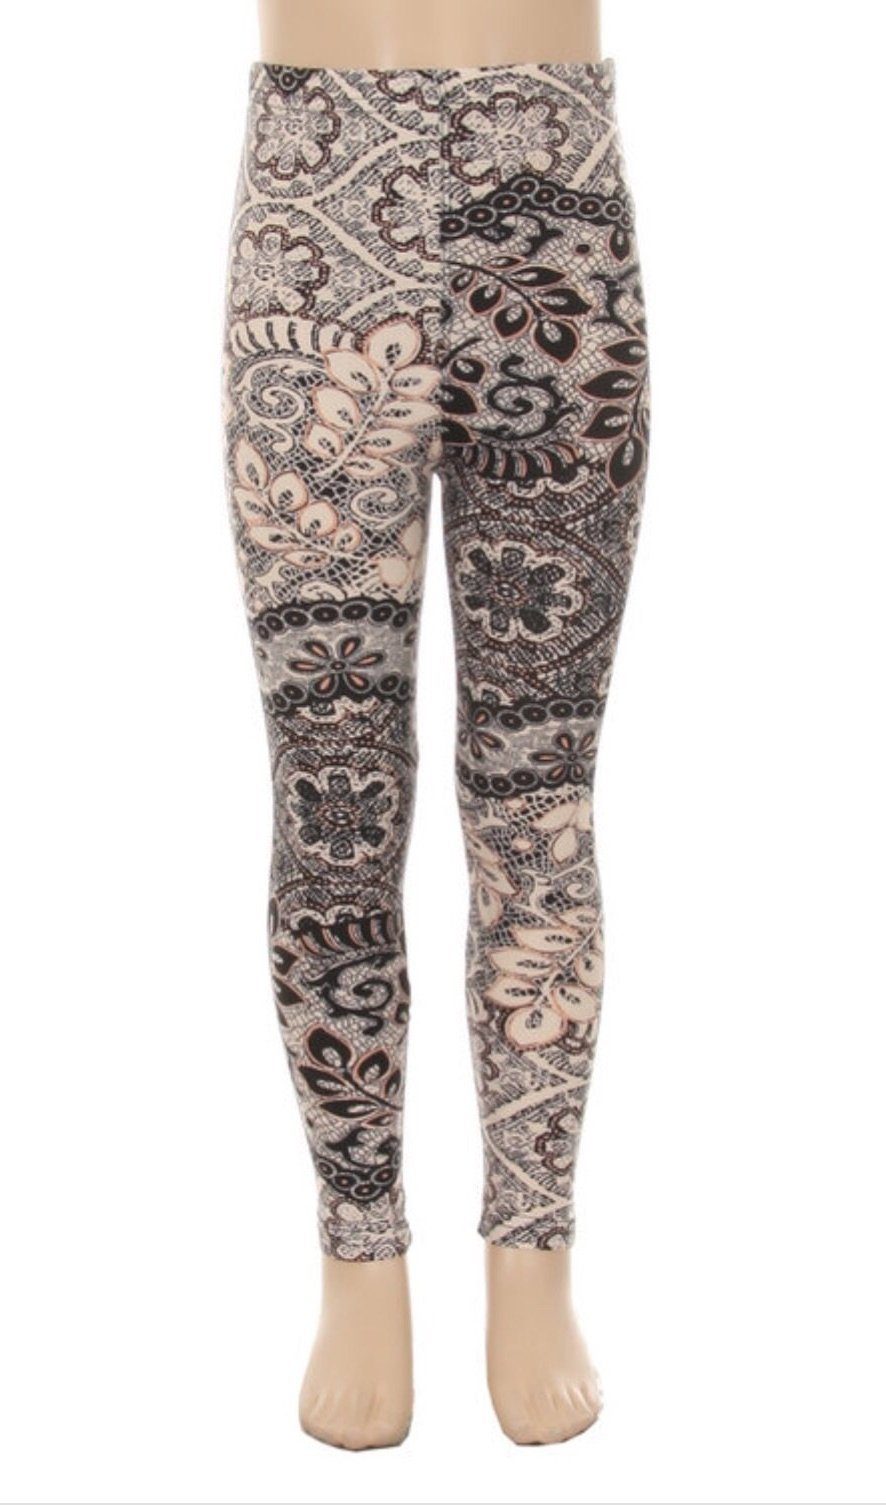 Girl's Lace Vine Printed Leggings Cream: S and L Leggings MomMe and More 